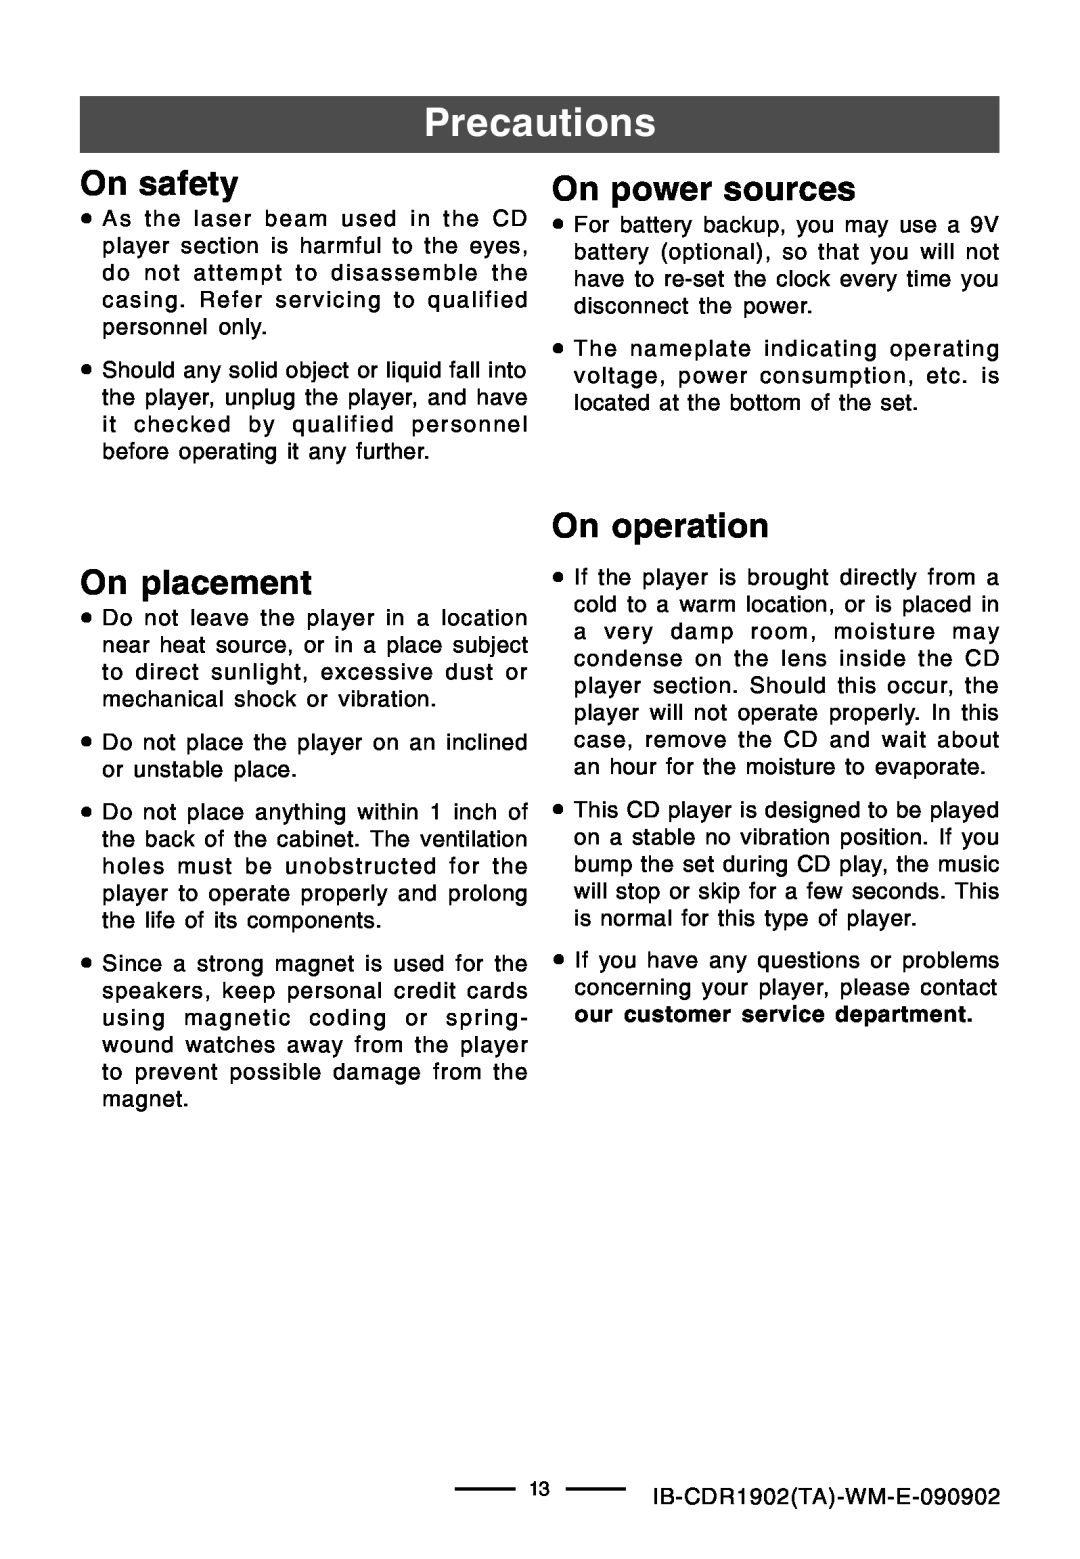 Lenoxx Electronics CDR-1902 operating instructions Precautions, On safety, On power sources, On placement, On operation 